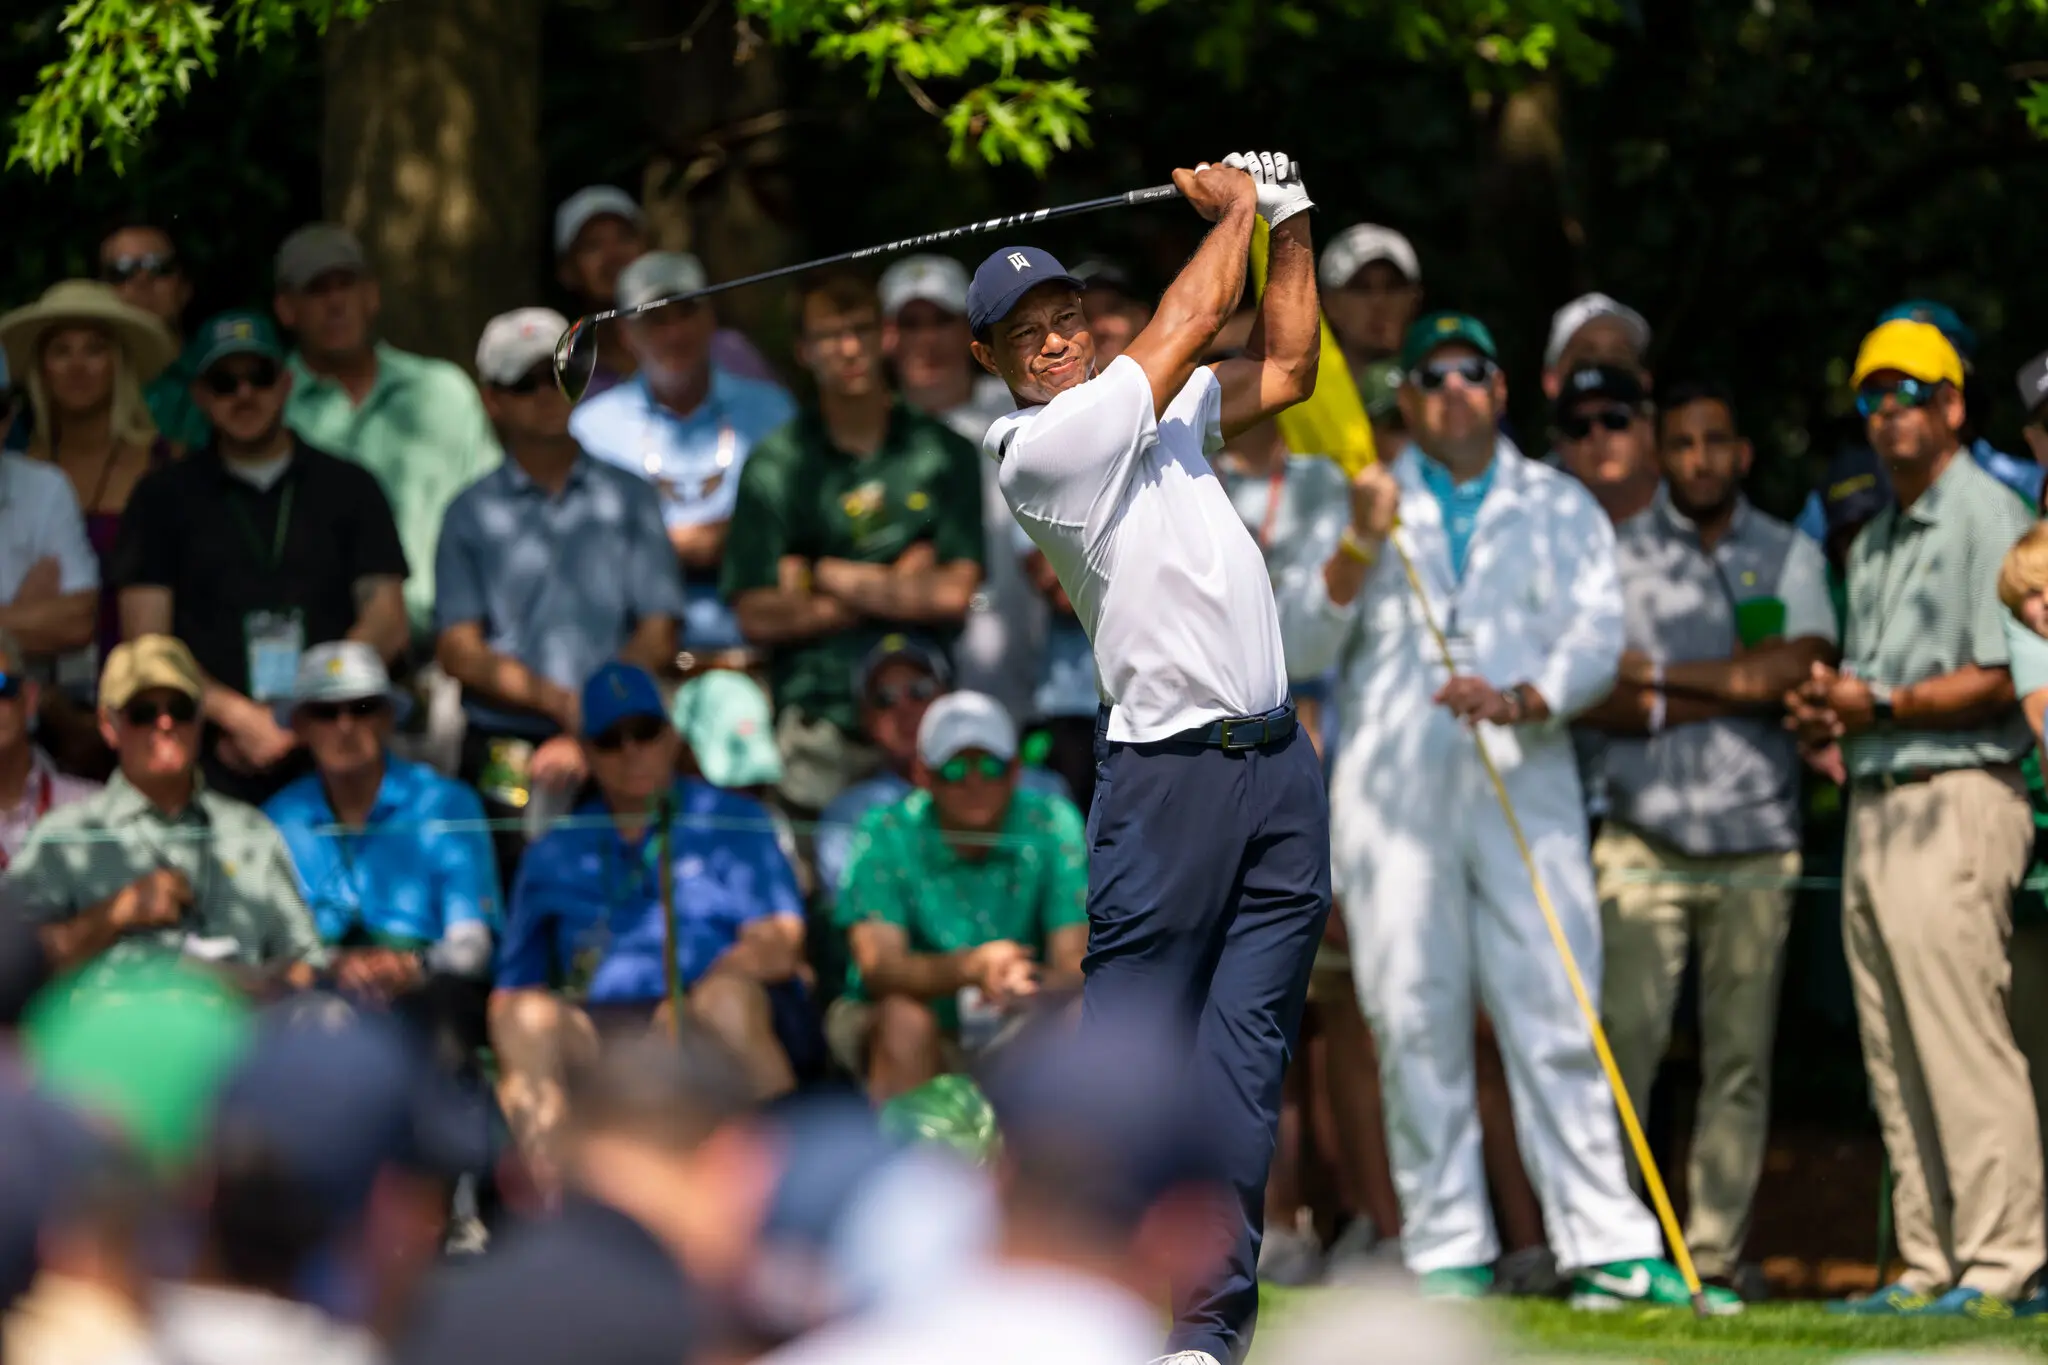 Tiger Woods hoped variable weather conditions Friday could help him get back into the Latest Masters Tournament Scores